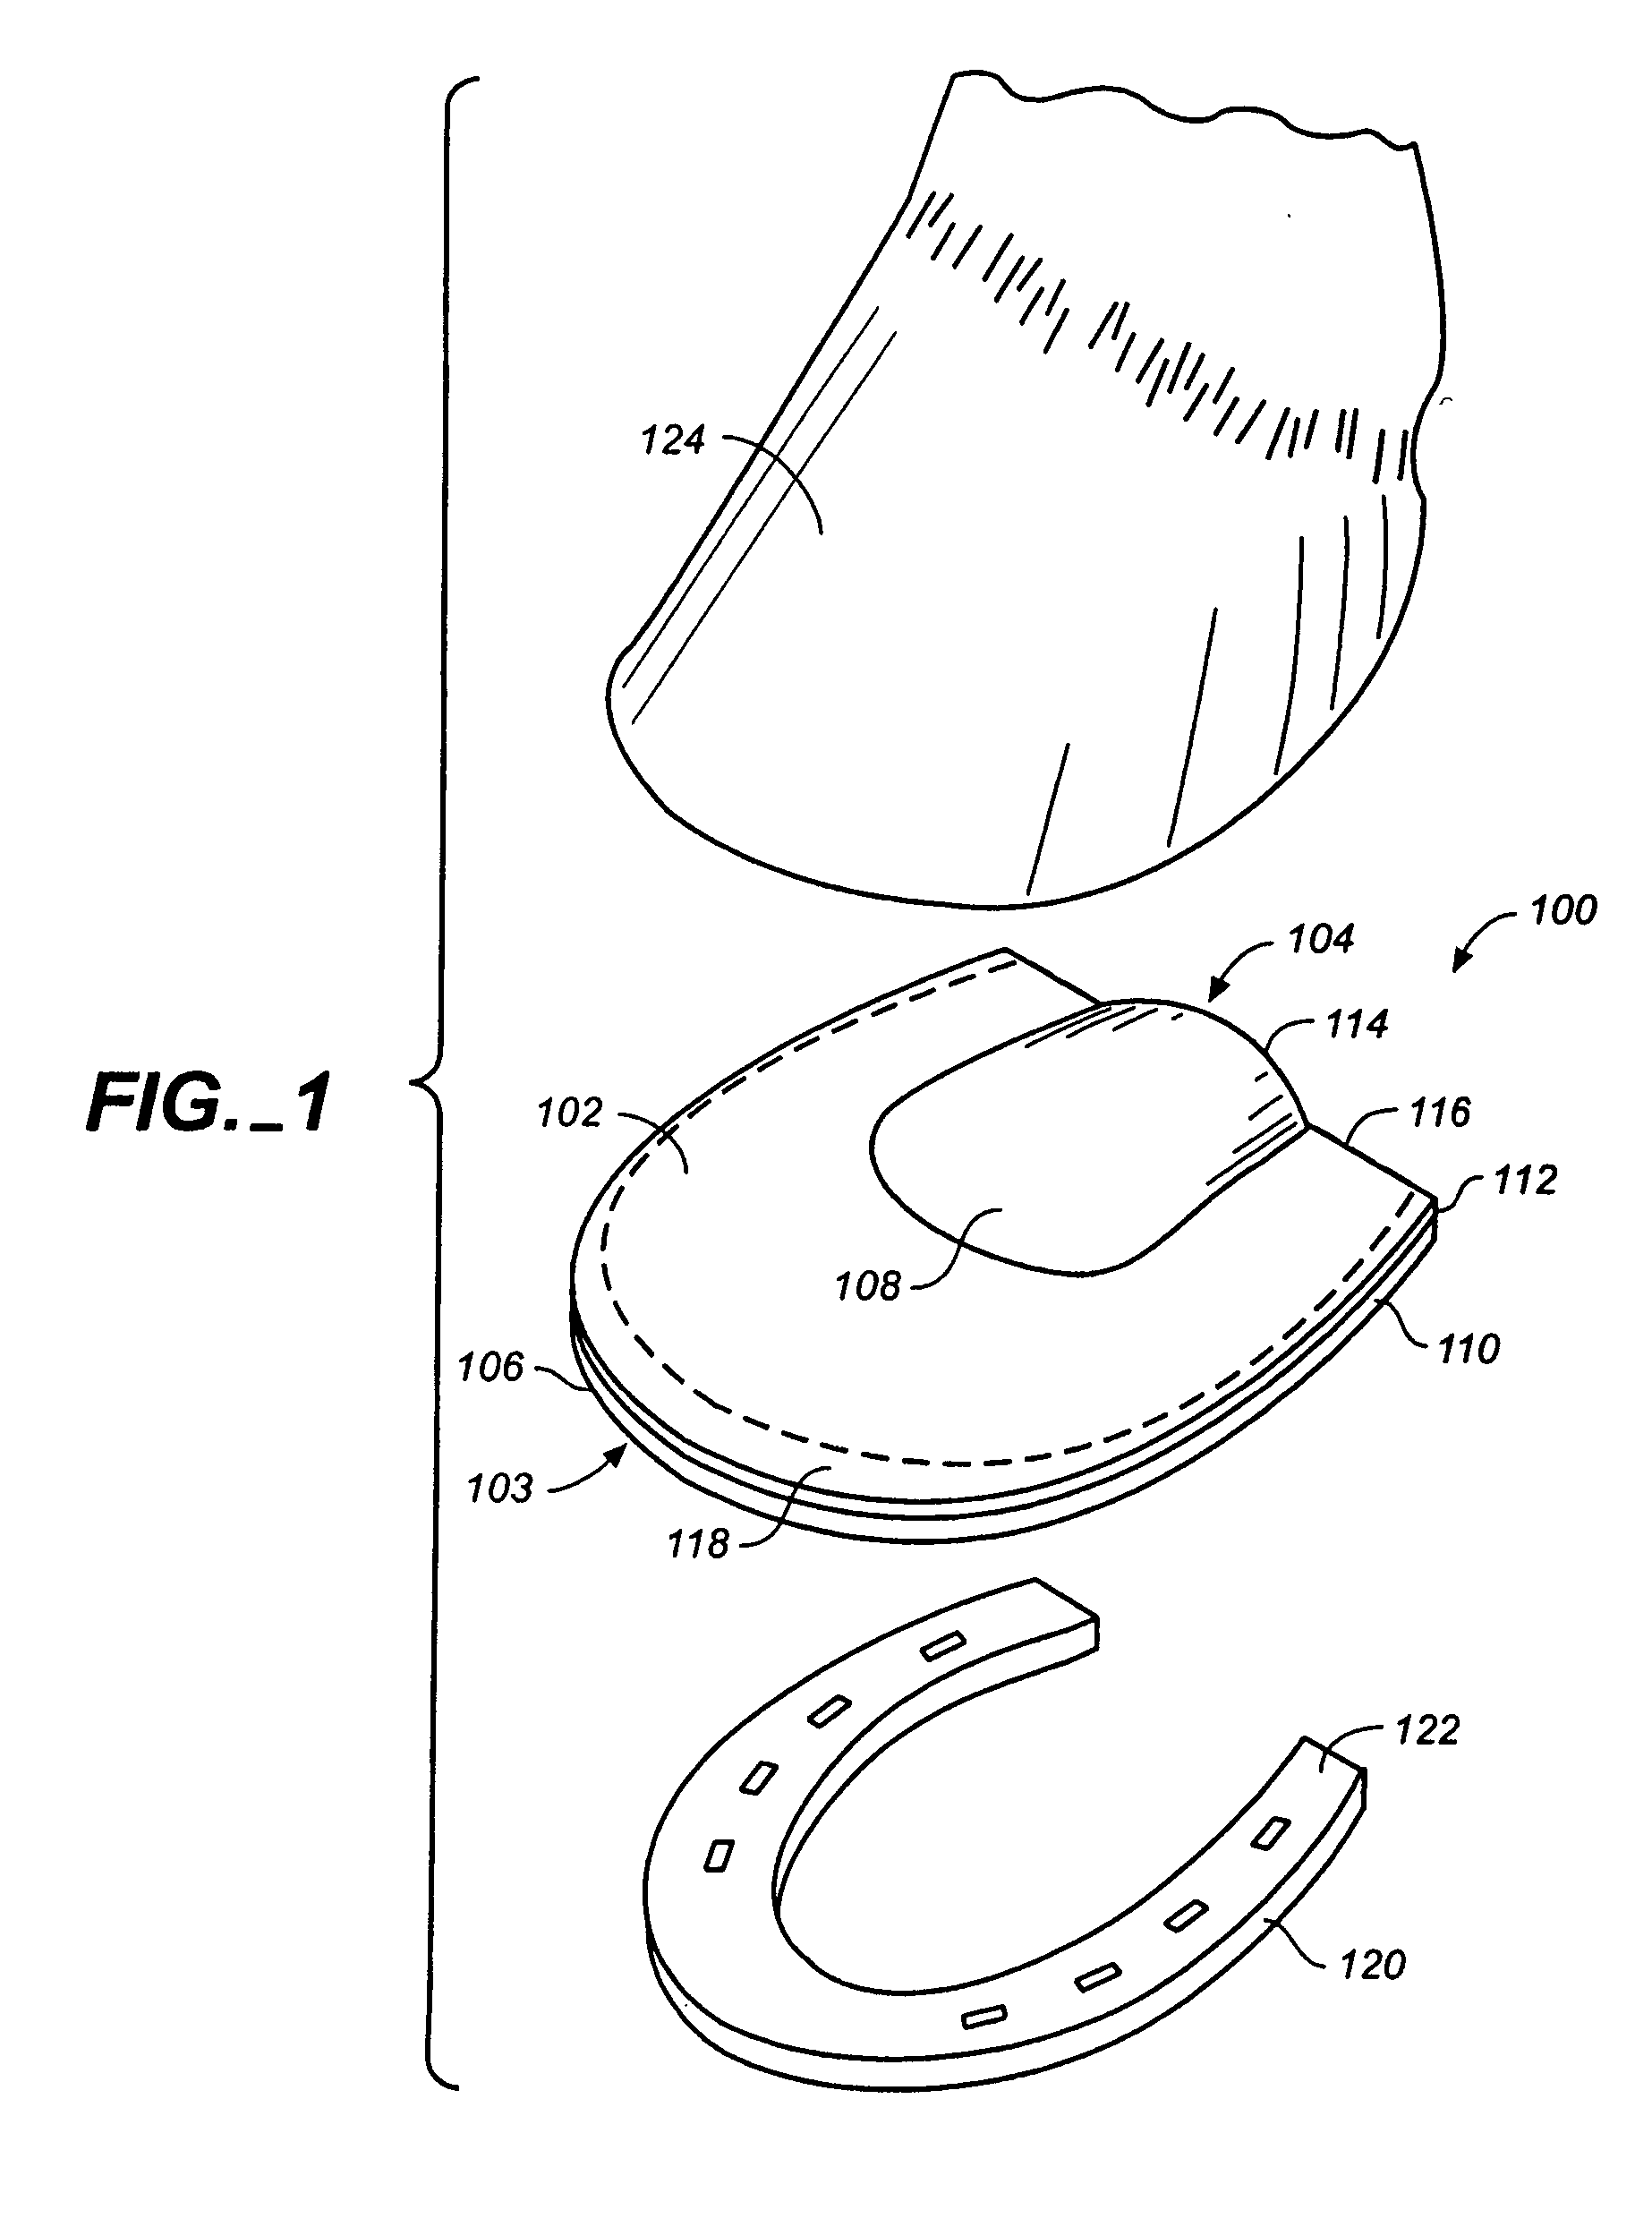 Inflatable horseshoe support pad